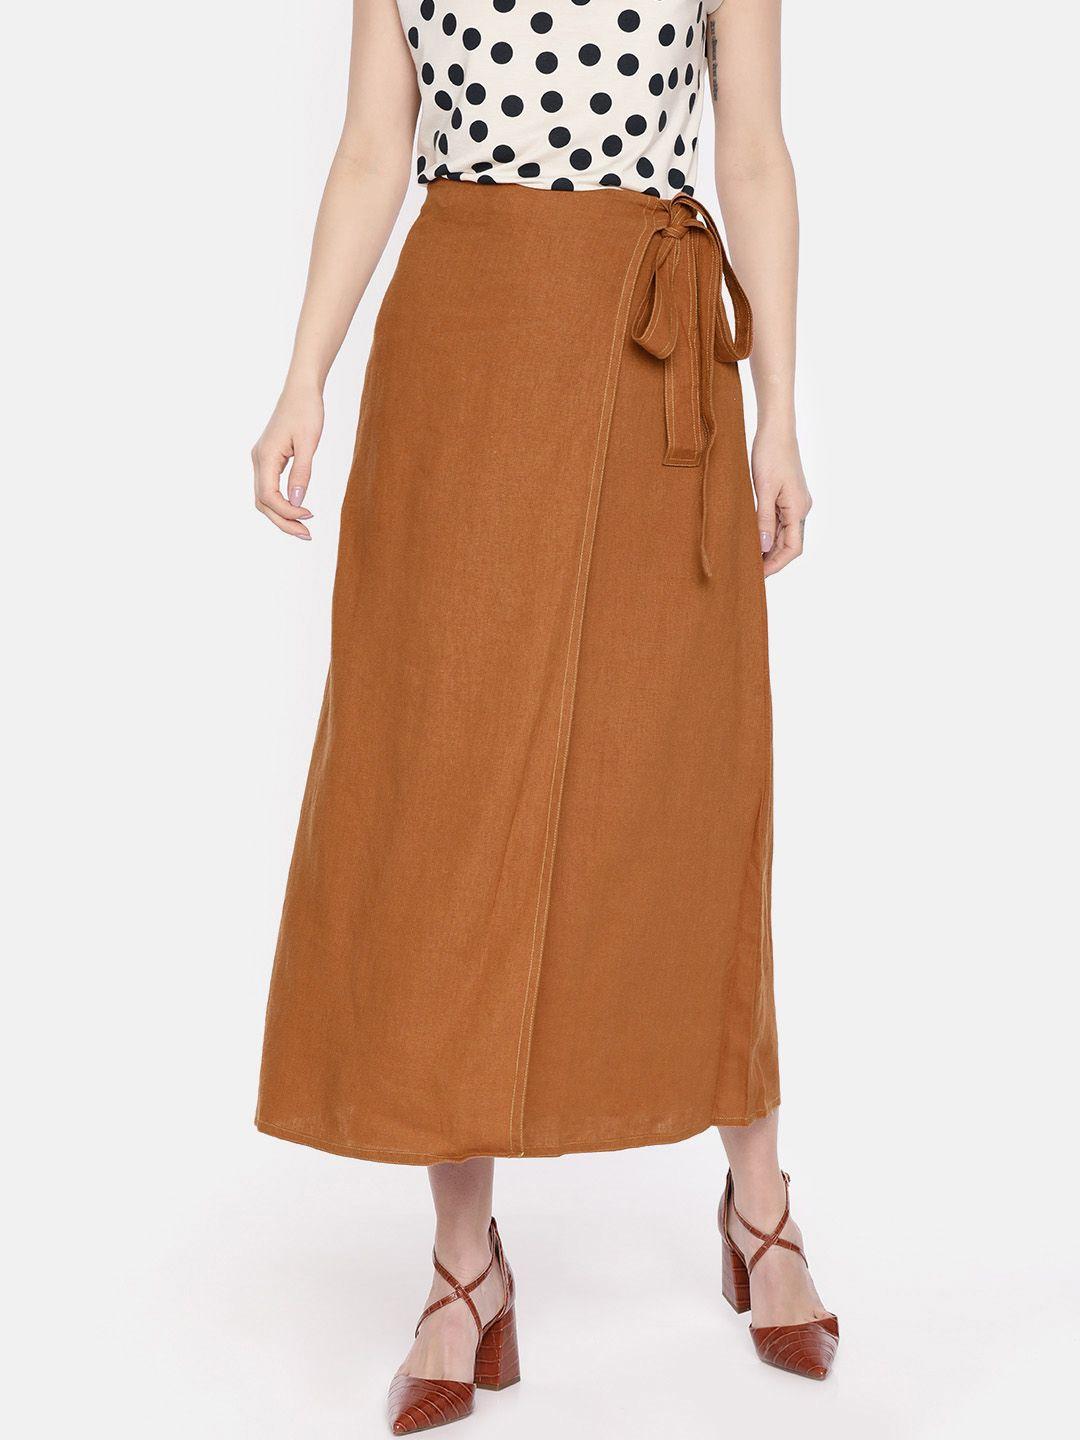 and-brown-bohemian-flared-wrap-skirt